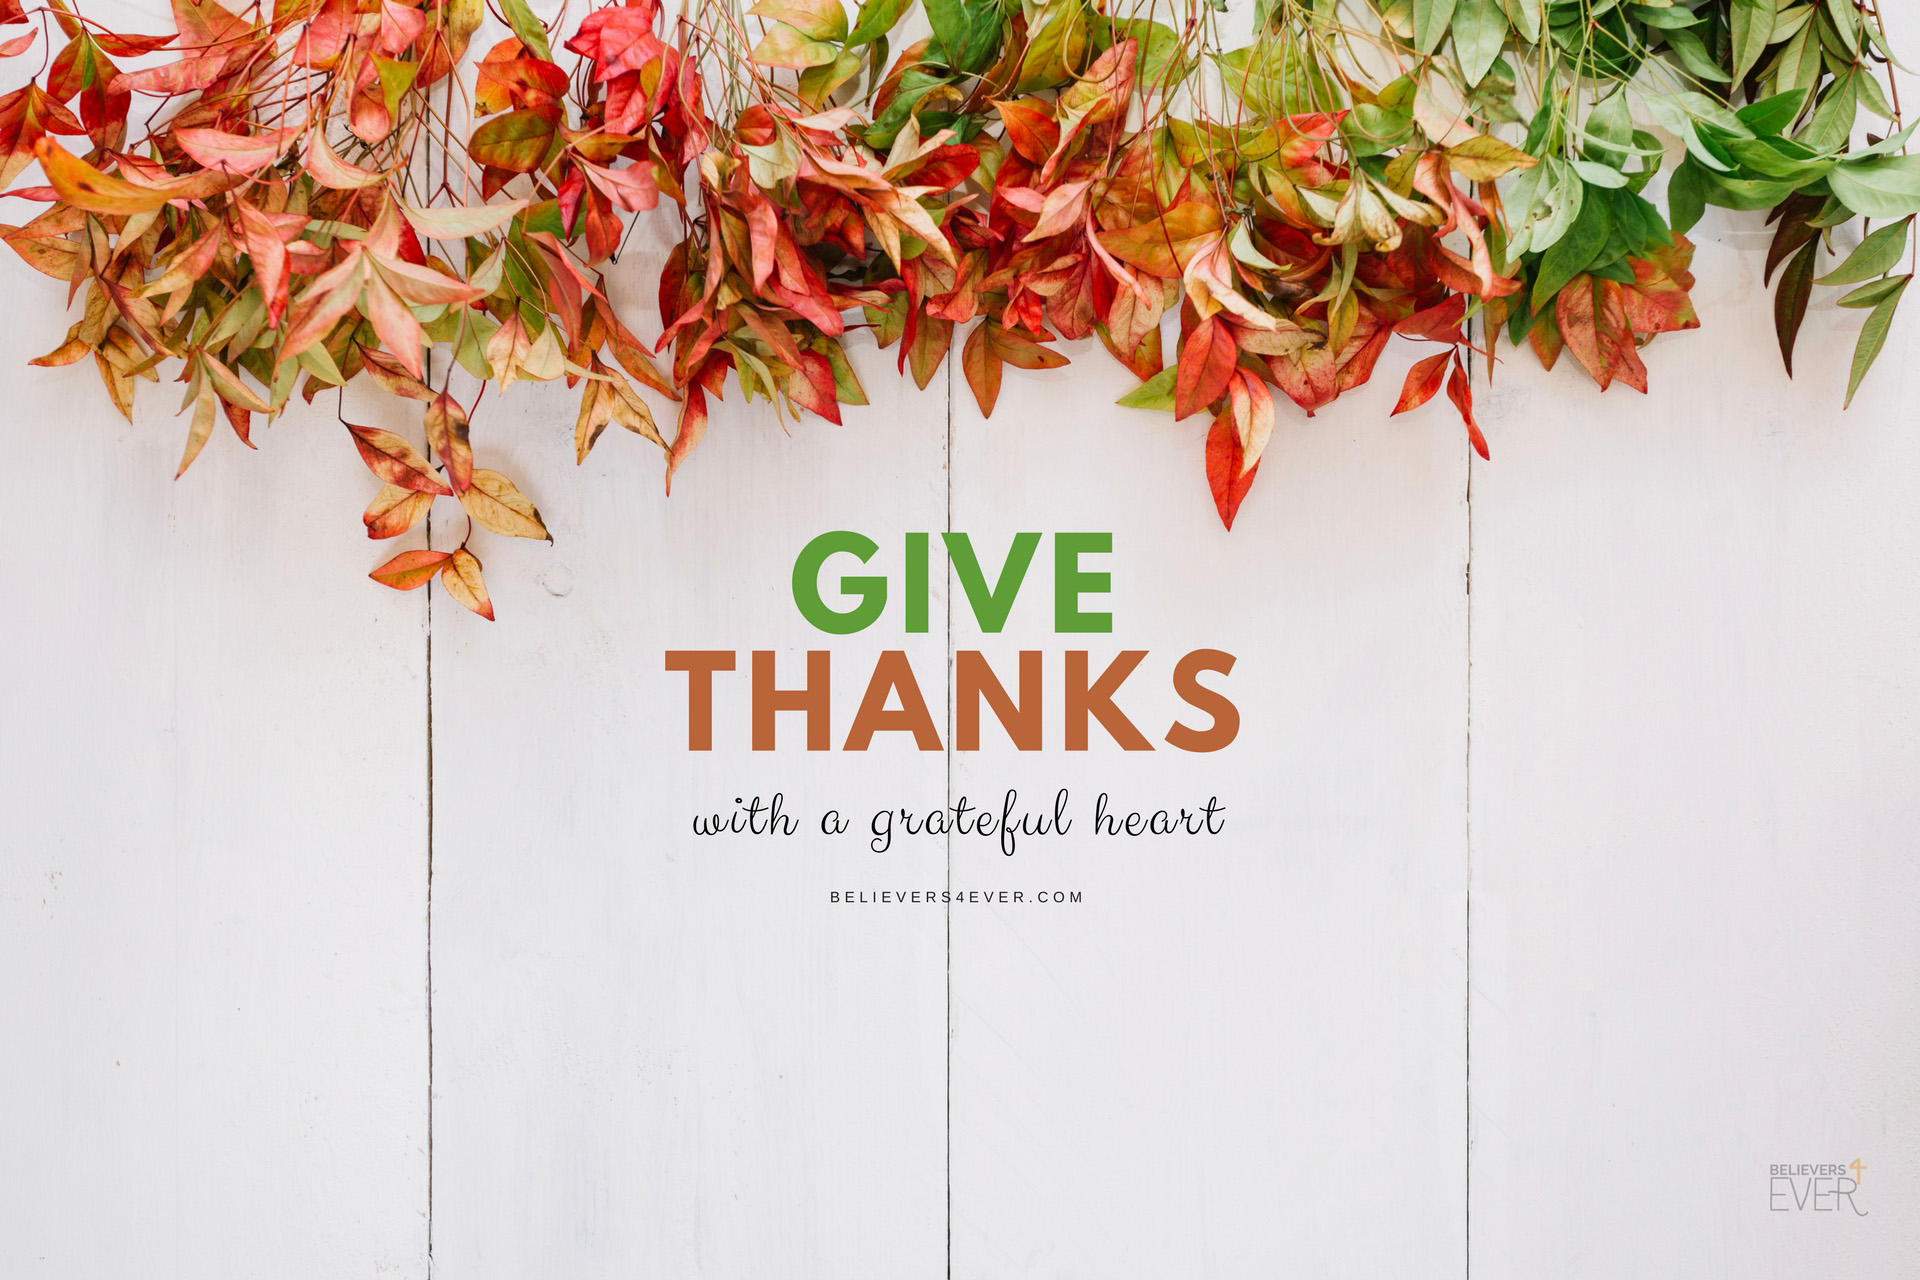 give-thanks-with-a-grateful-heart-give-thanks-with-a-grateful-heart